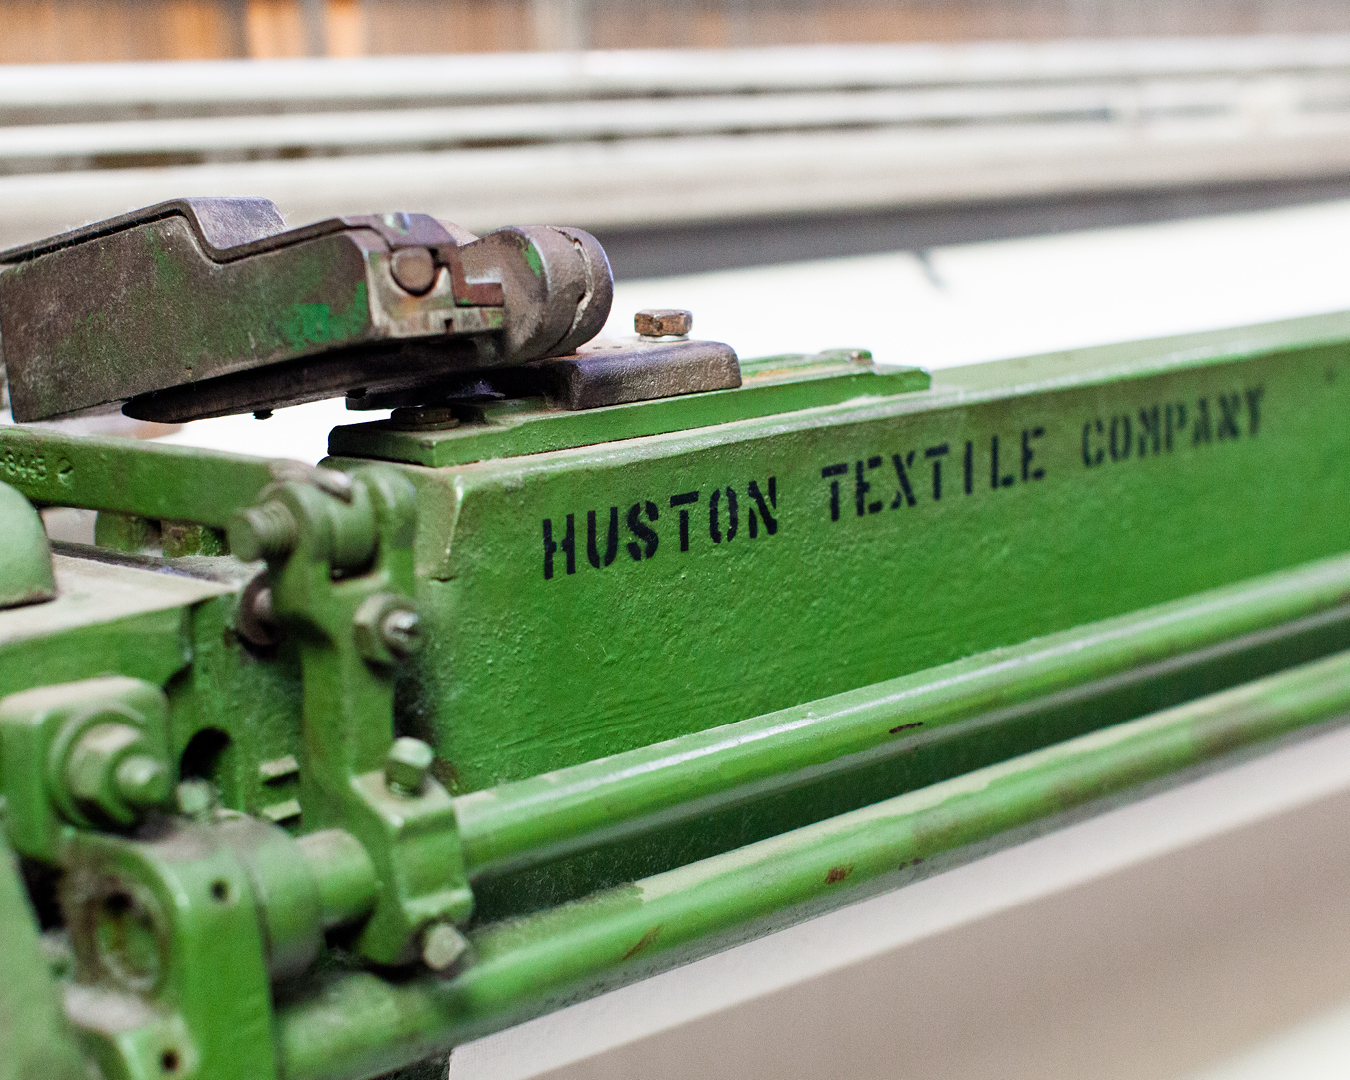 photograph-green-painted-heavy-metal-equipment-with-black-text-huston-textile-company